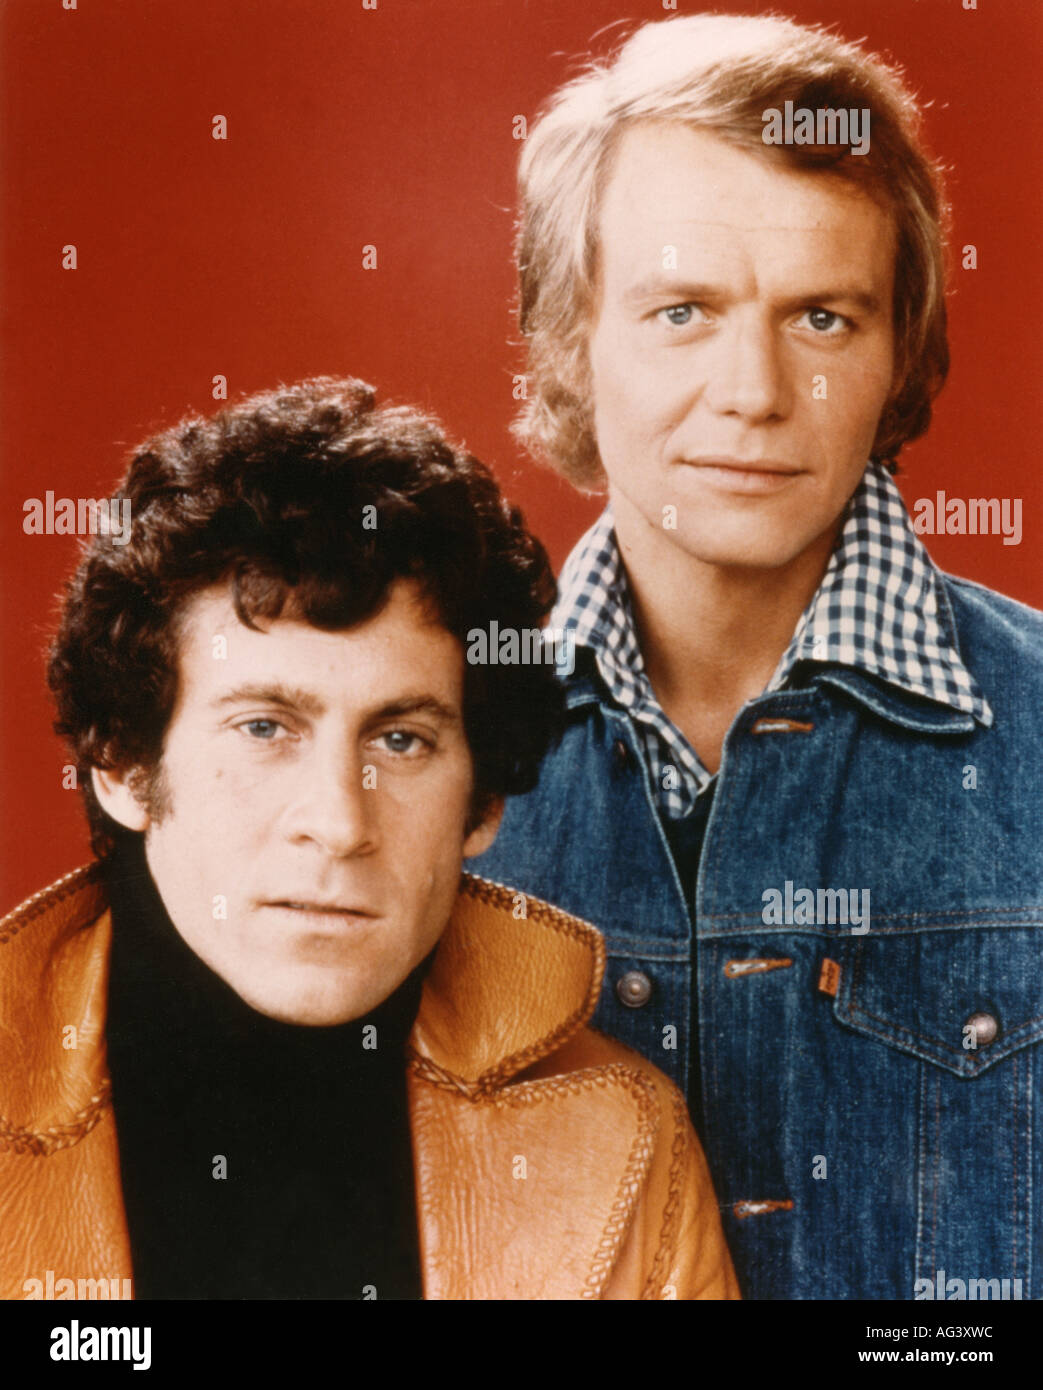 Starsky & Hutch Actors: Who played Hutch and Starsky in the show